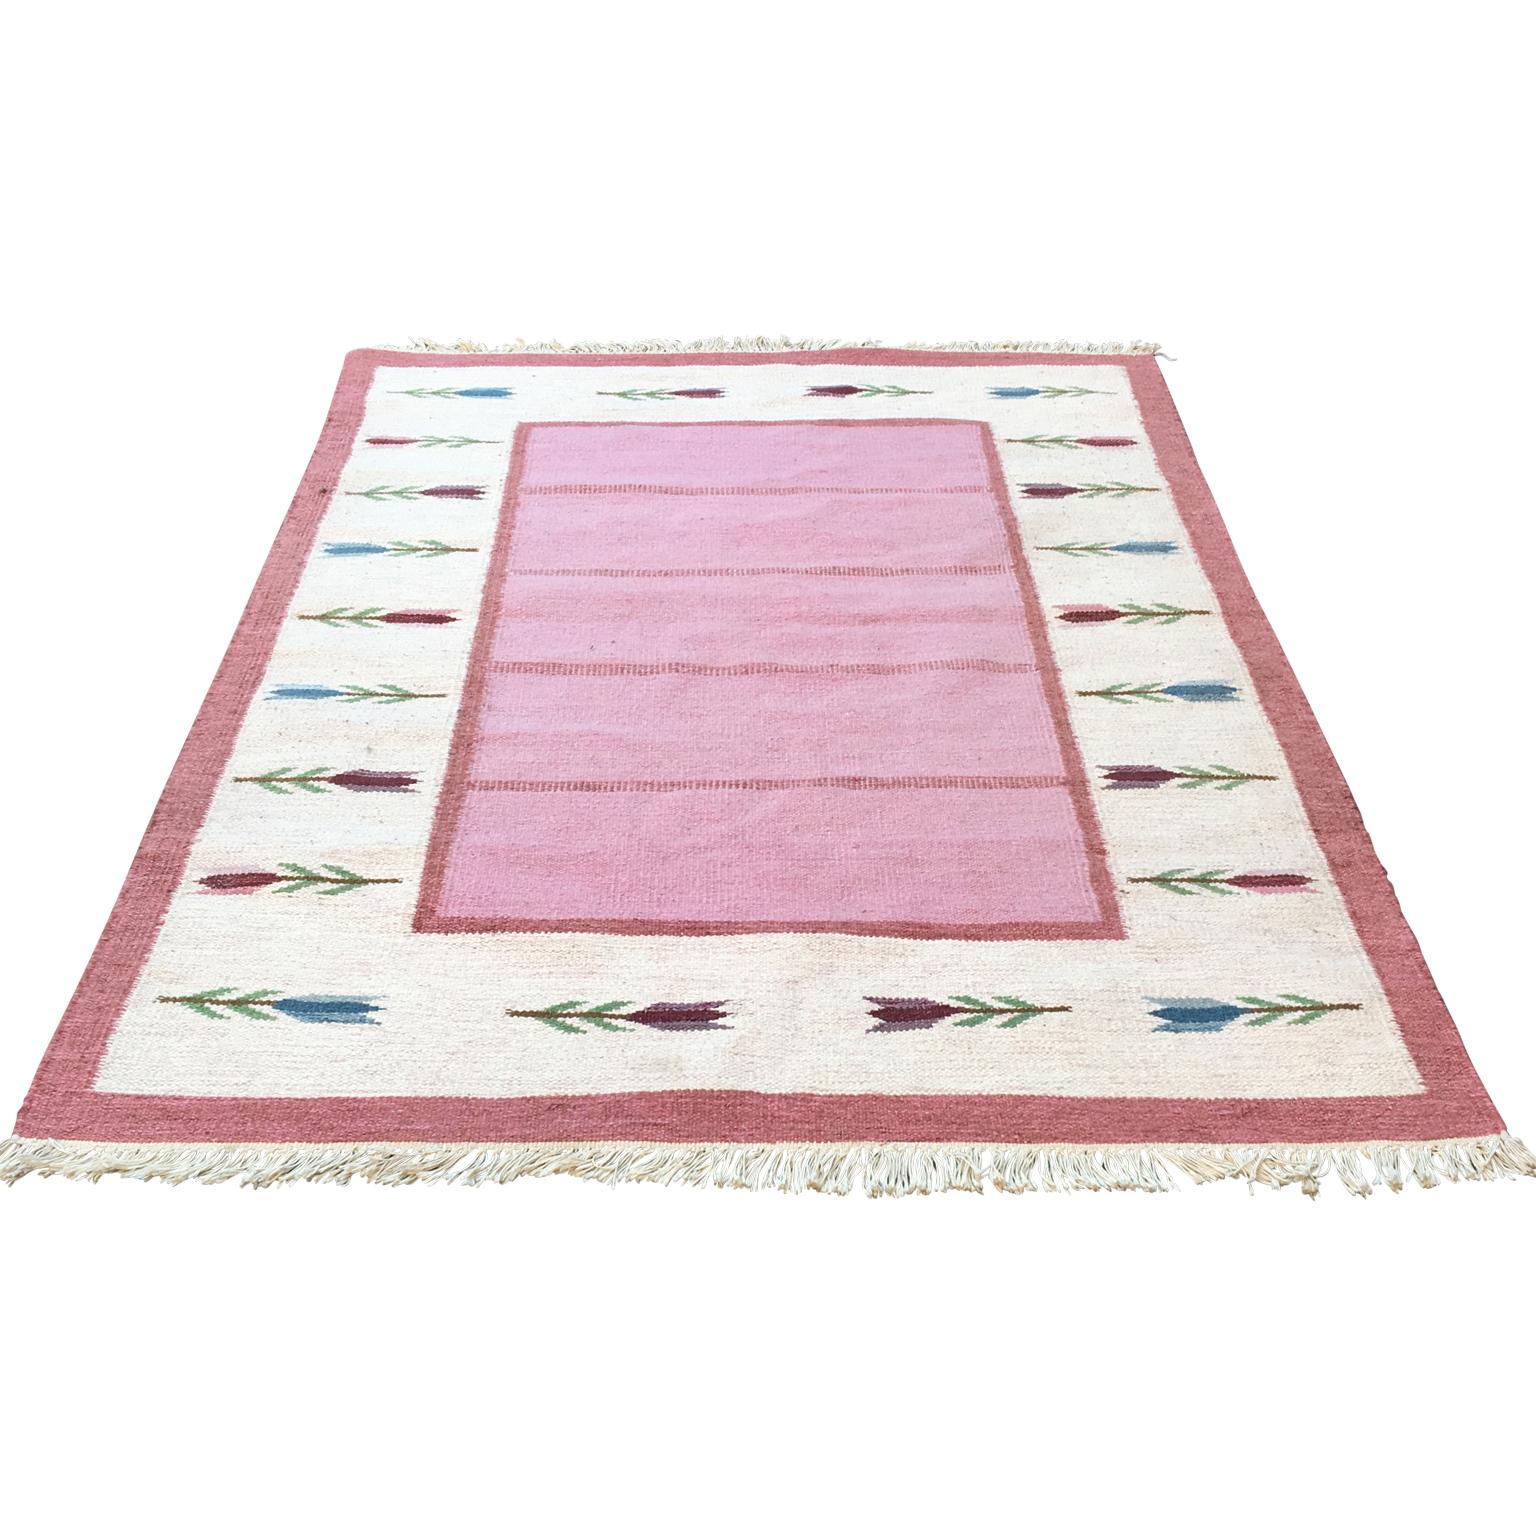 A Mid-Century Modern vintage handmade Swedish carpet in wool with a flower geometric pattern. The tradition of quality handwoven rolakan carpets and rug is really showing up in this piece.